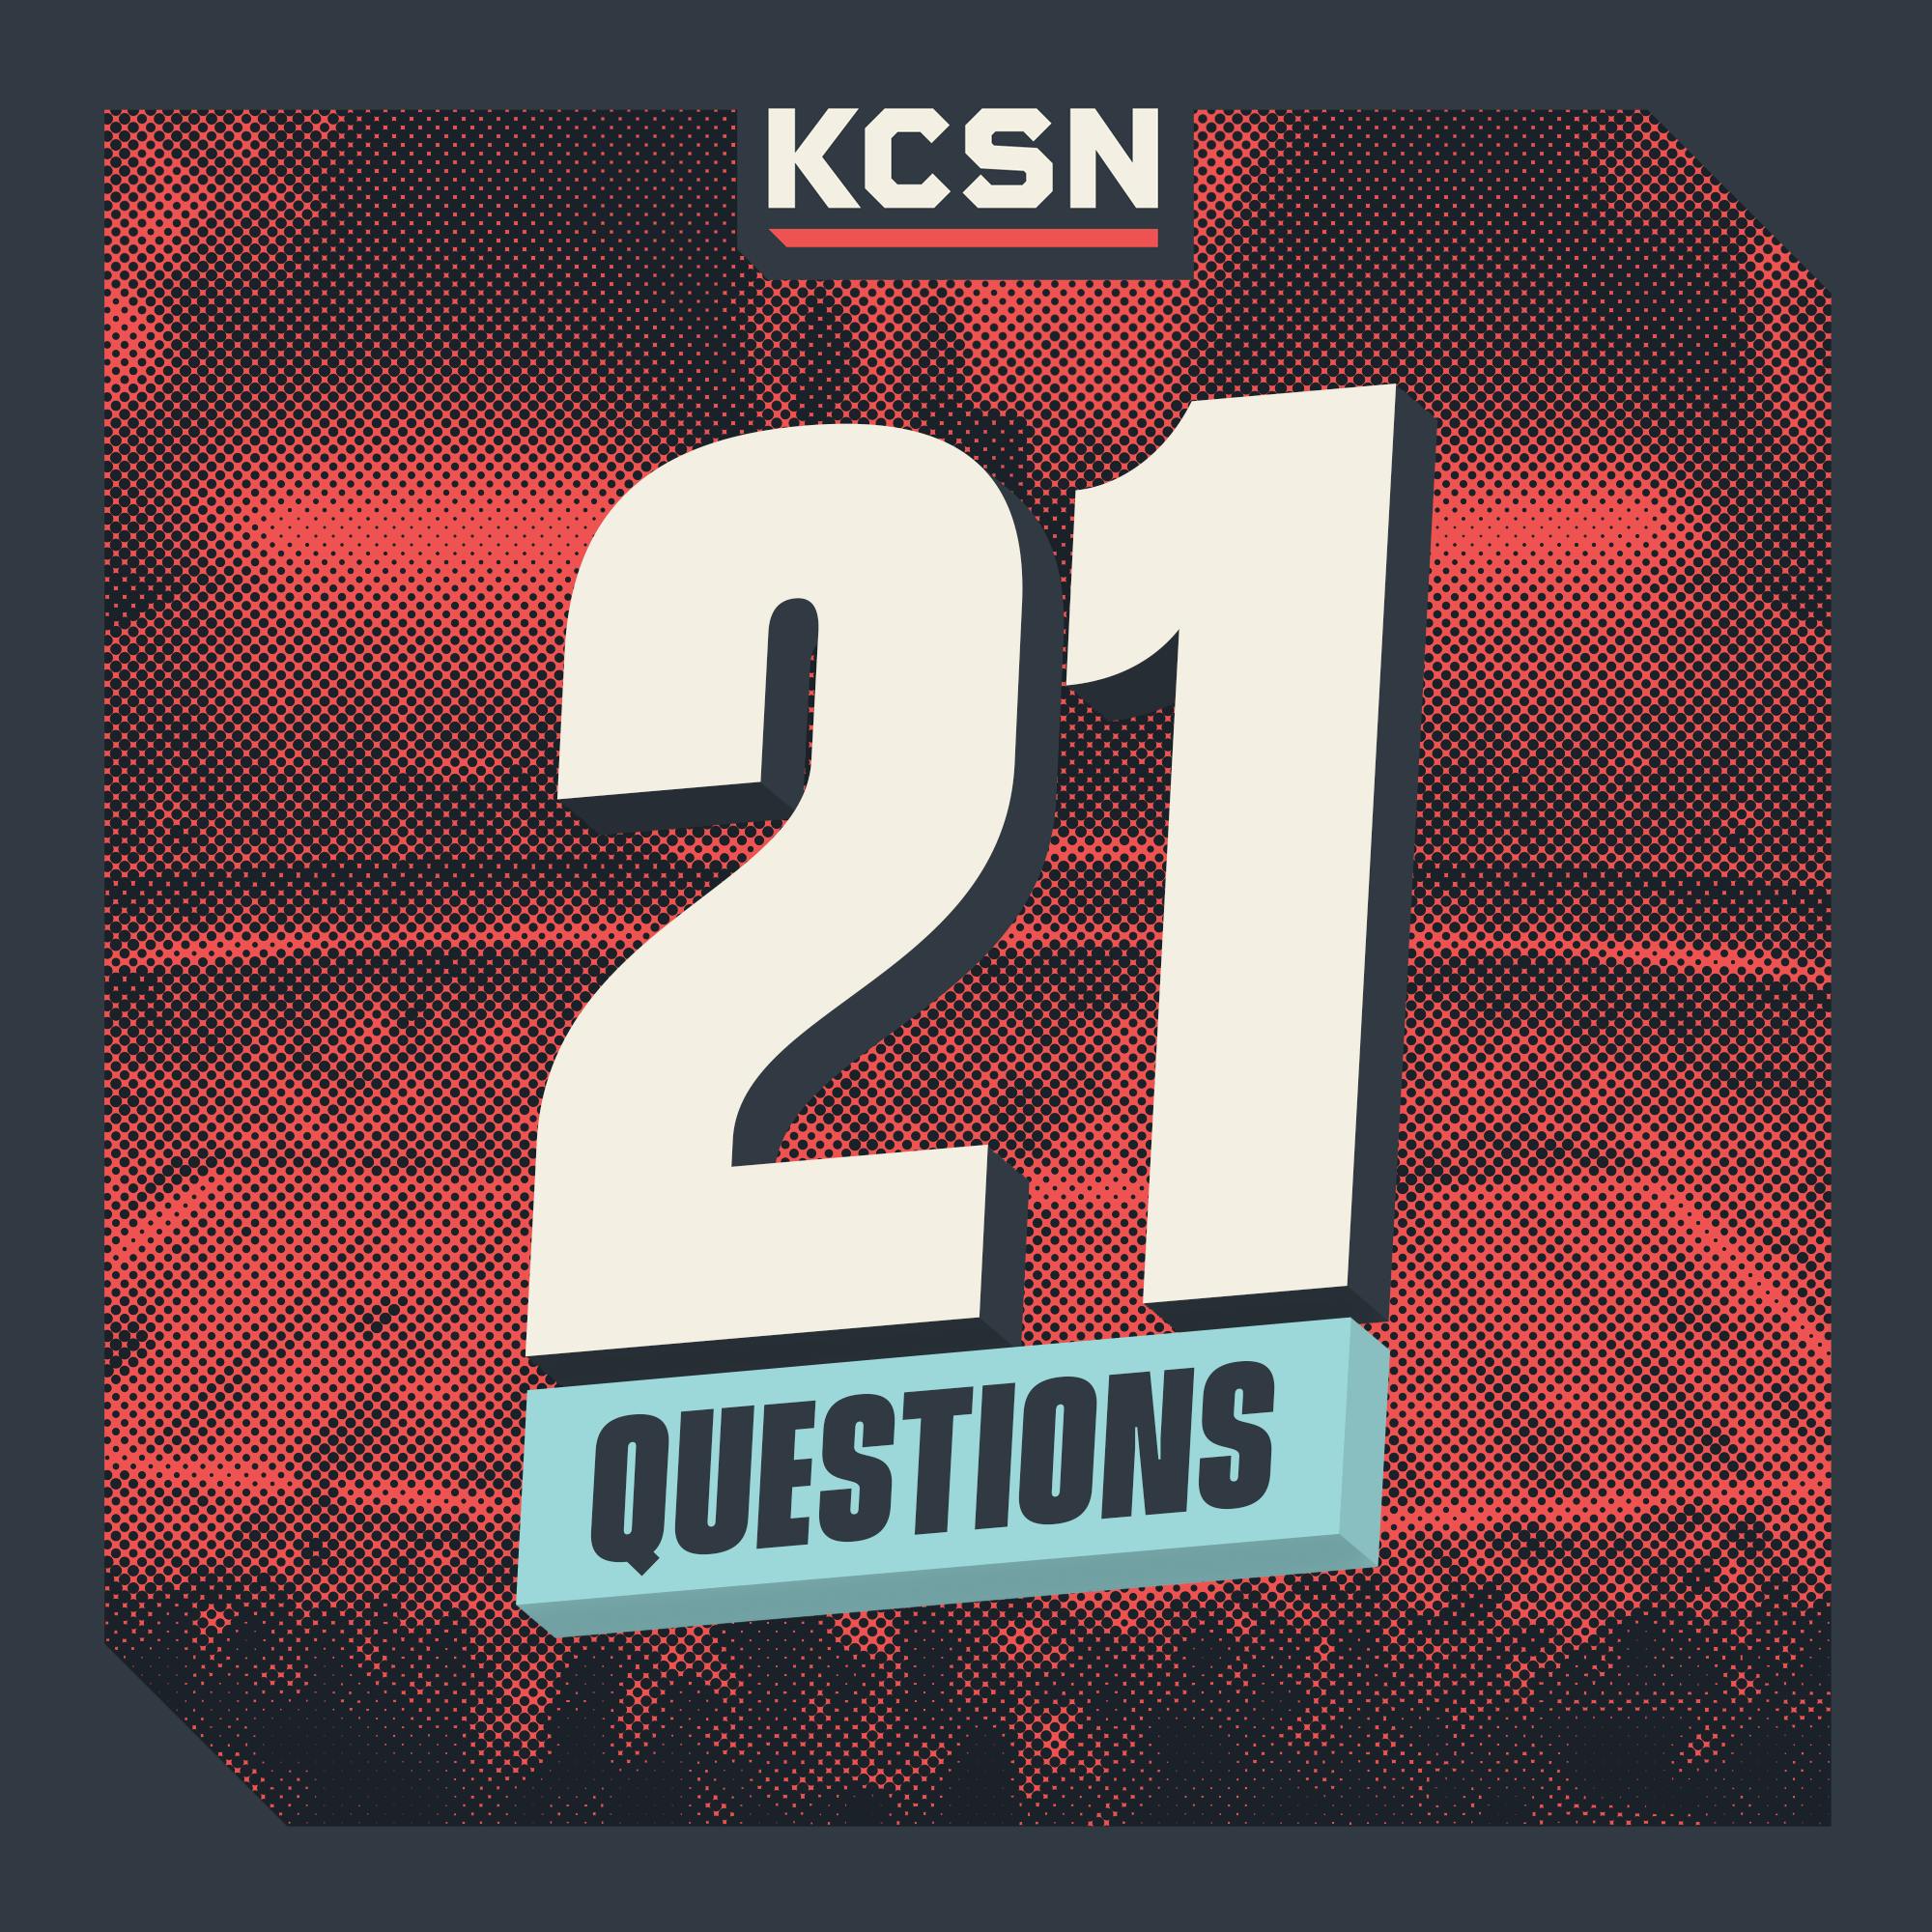 21 Questions 2/21: Chiefs Faced With Tough Offseason Decisions — Do They Make Splash or Run it Back?